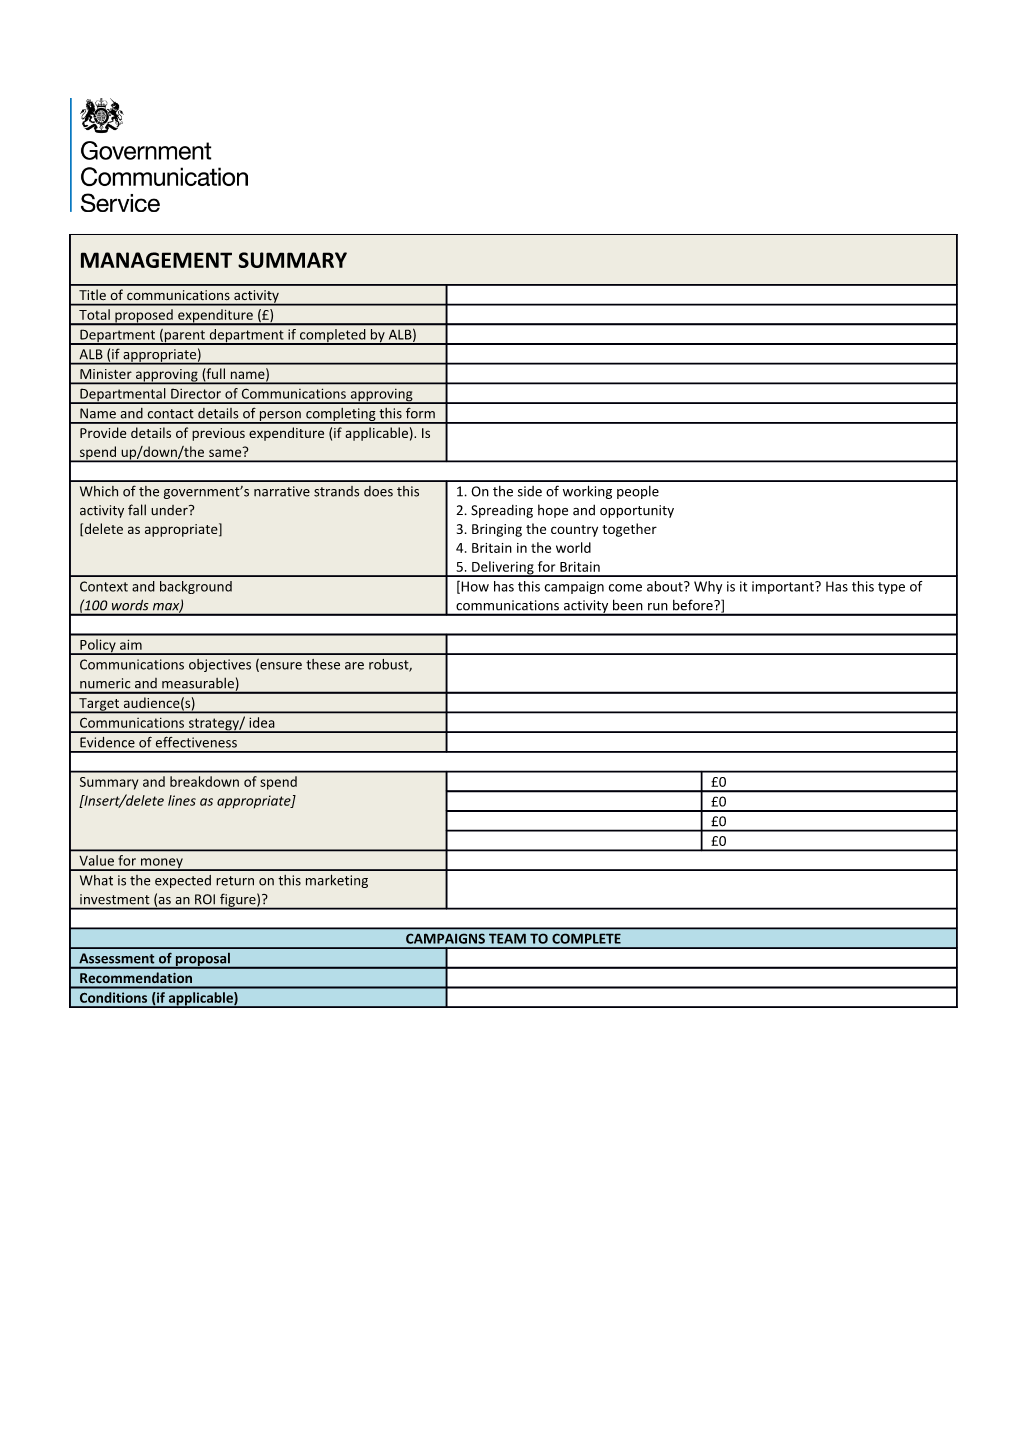 This Form Should Be Completed by the Digital Leader Within the Department for Any Spend